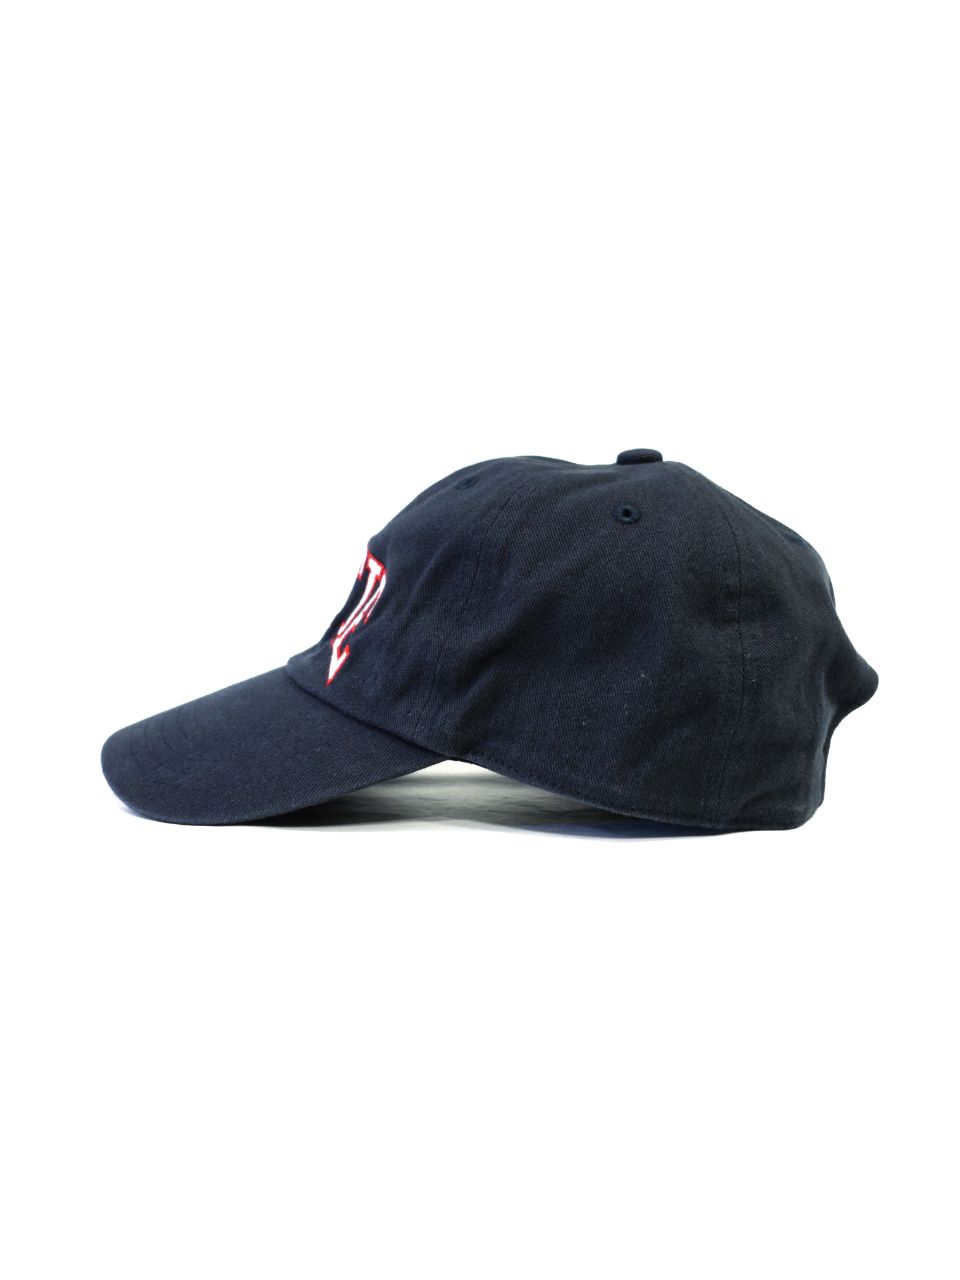 COOTIE PRODUCTIONS - Embroidery 6 Panel Cap (NAVY) / ロゴ ベース